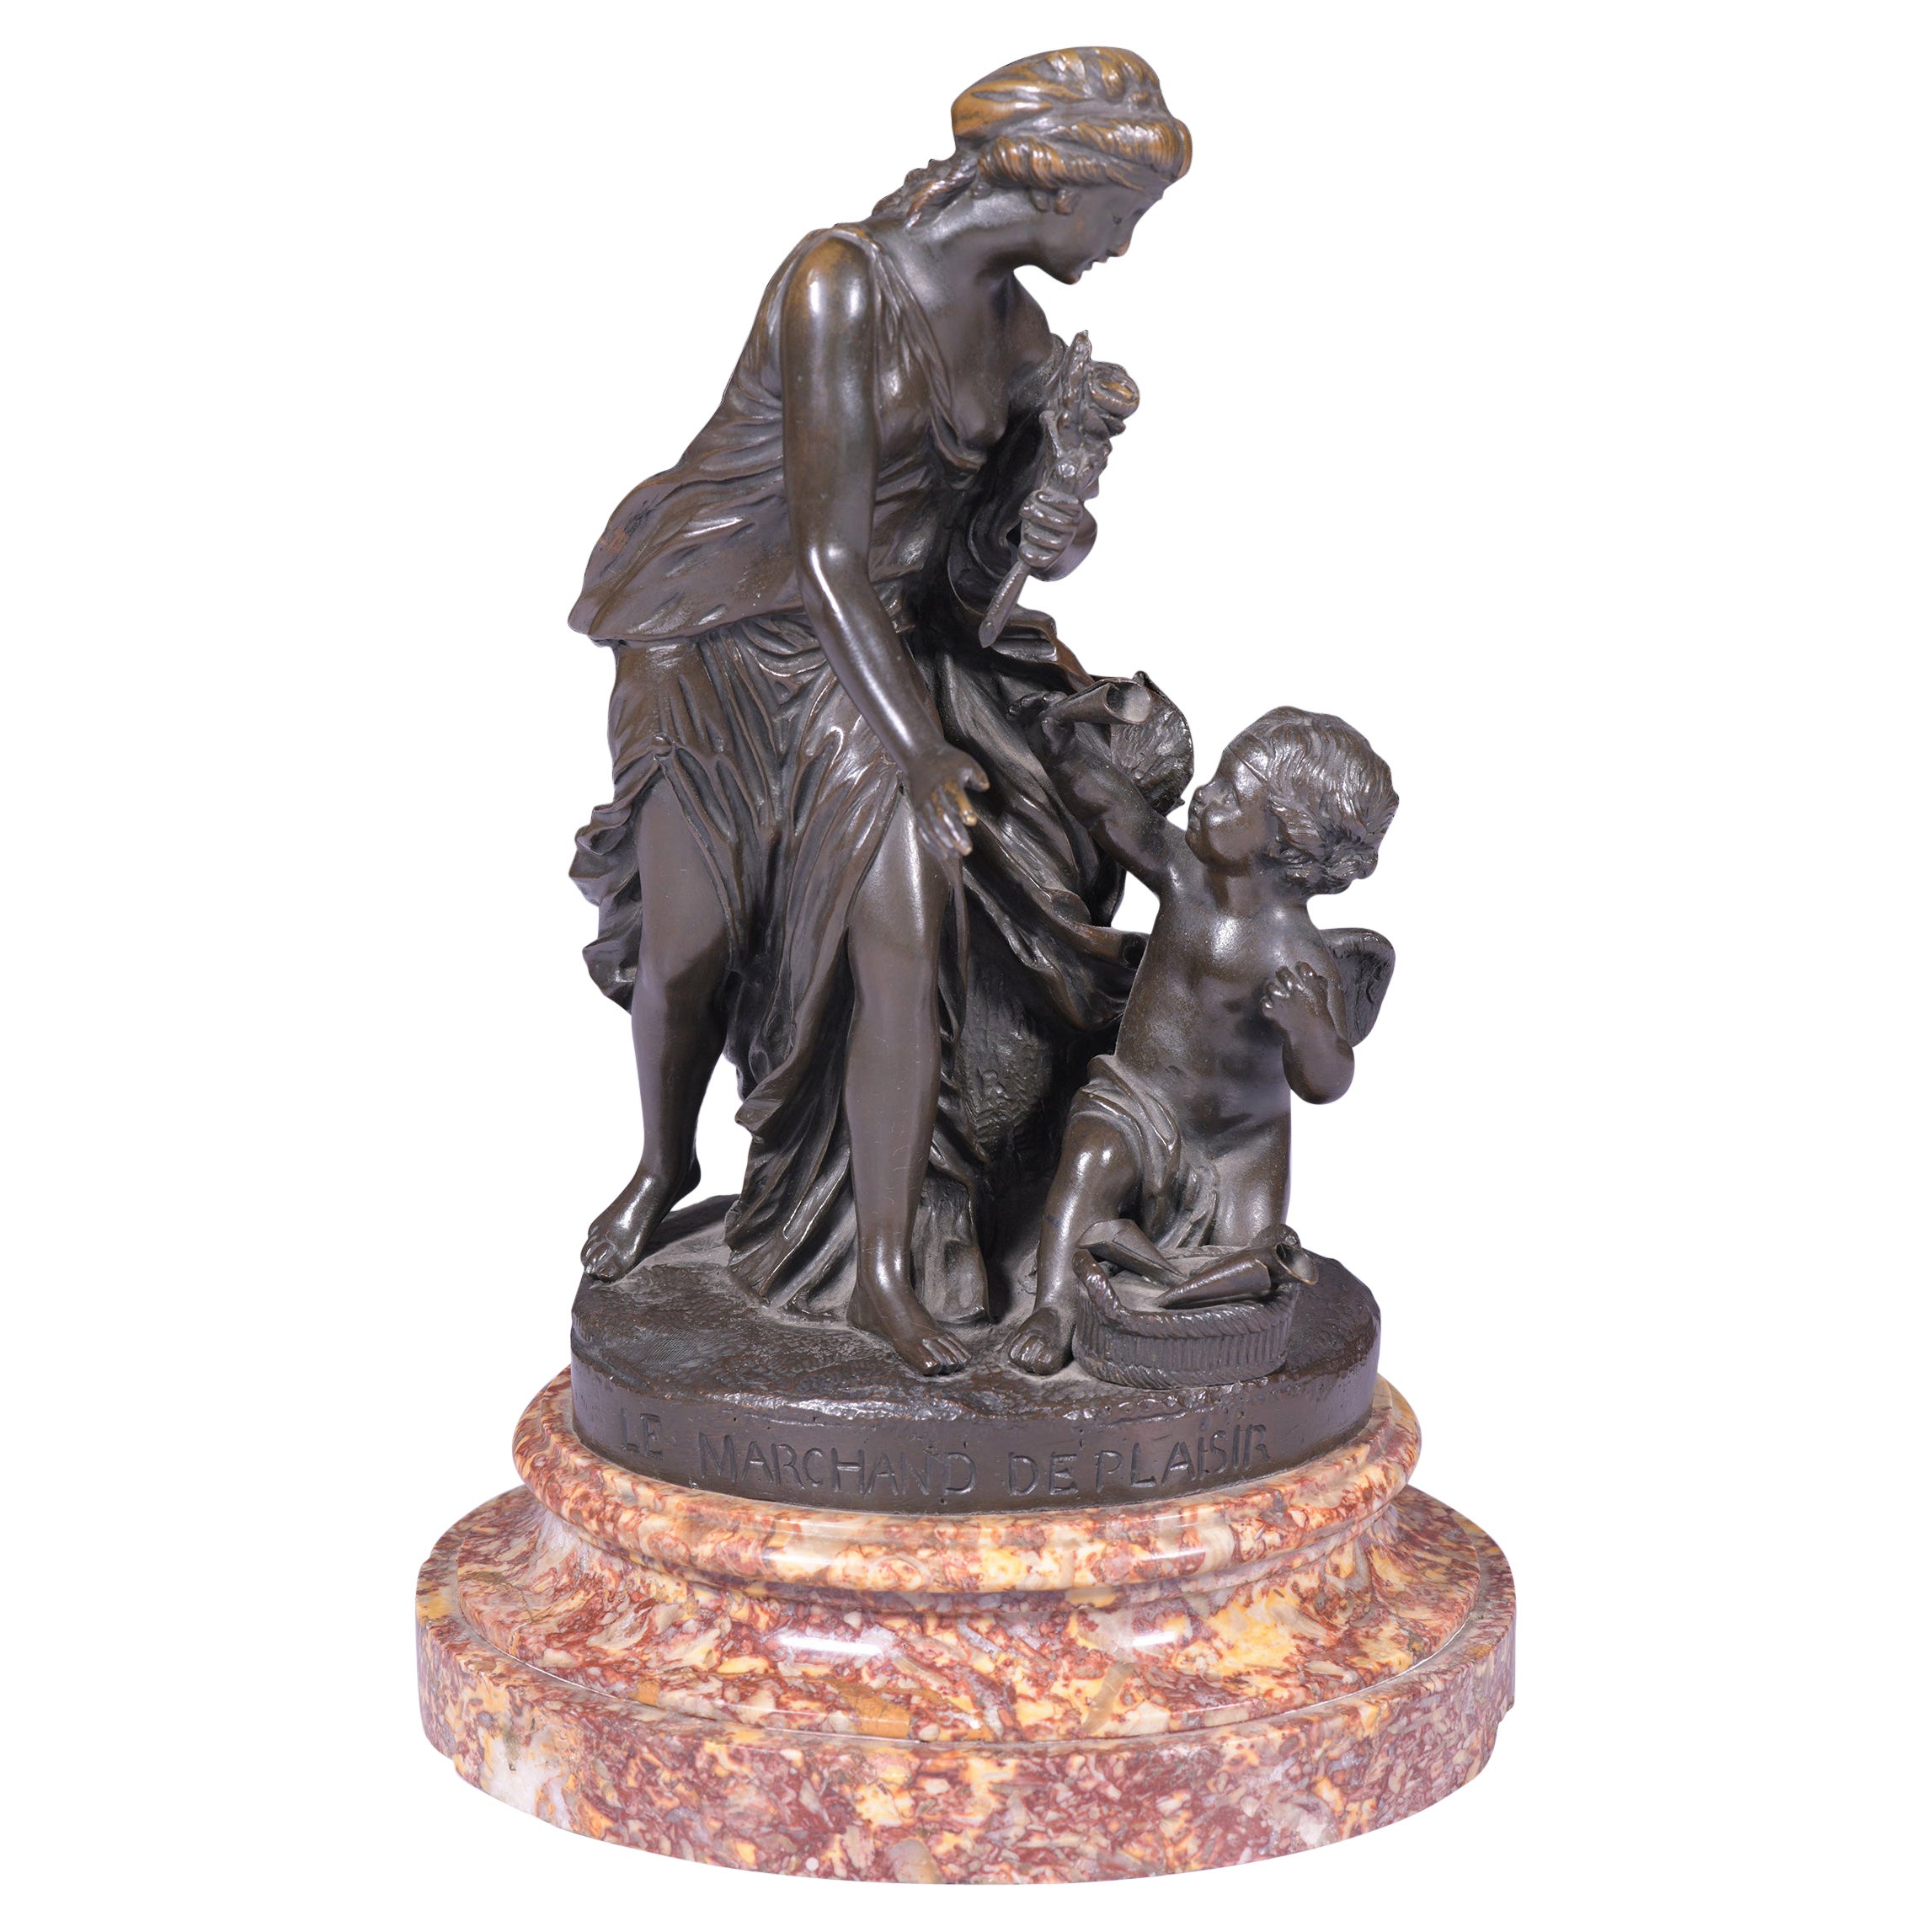 19th Century French Classical Bronze Group Signed Pigal "Le Merchand De Plaisir" For Sale